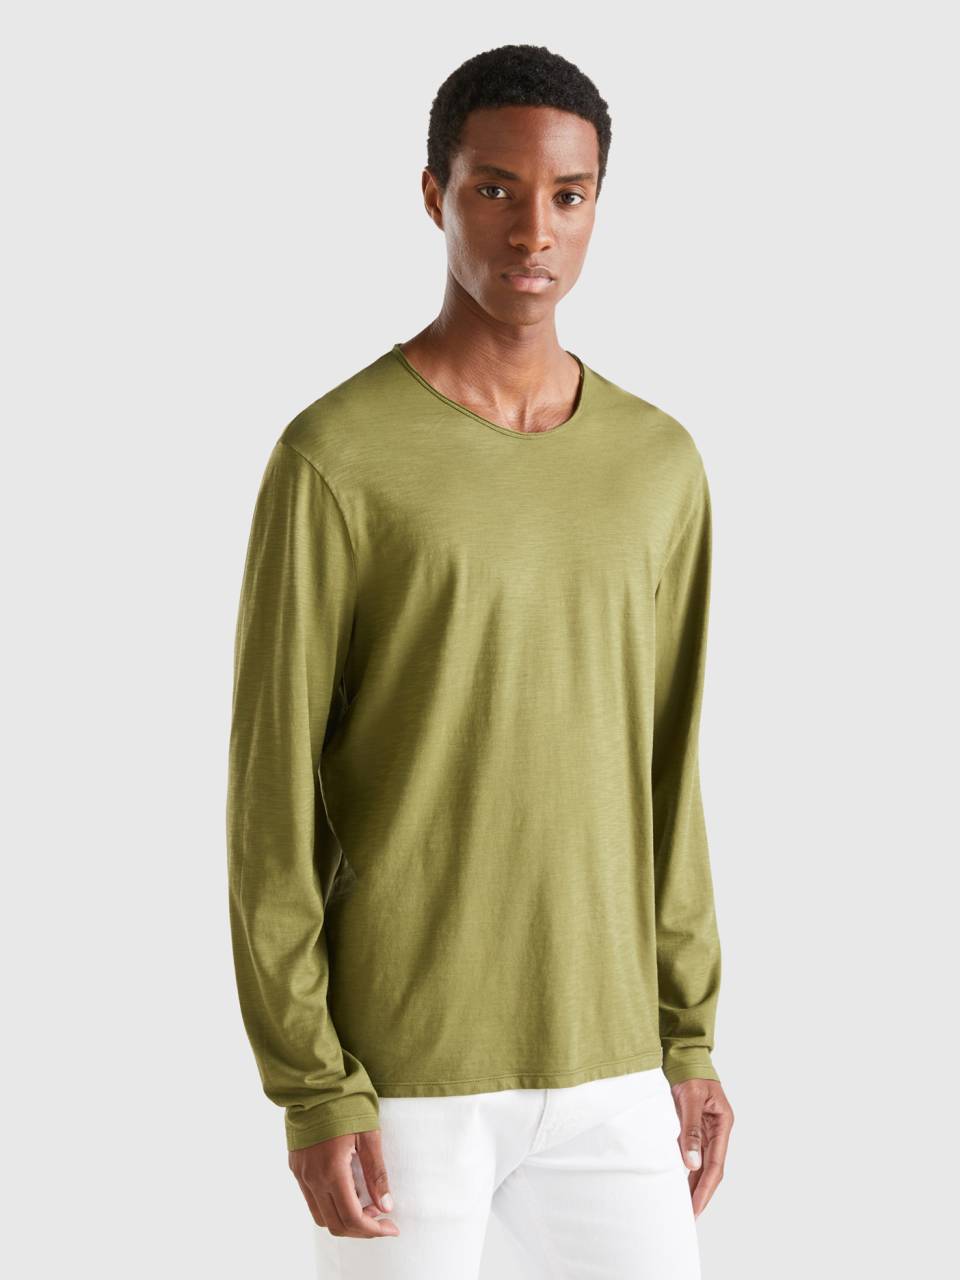 Long sleeve t-shirt in 100% cotton - Military Green | Benetton